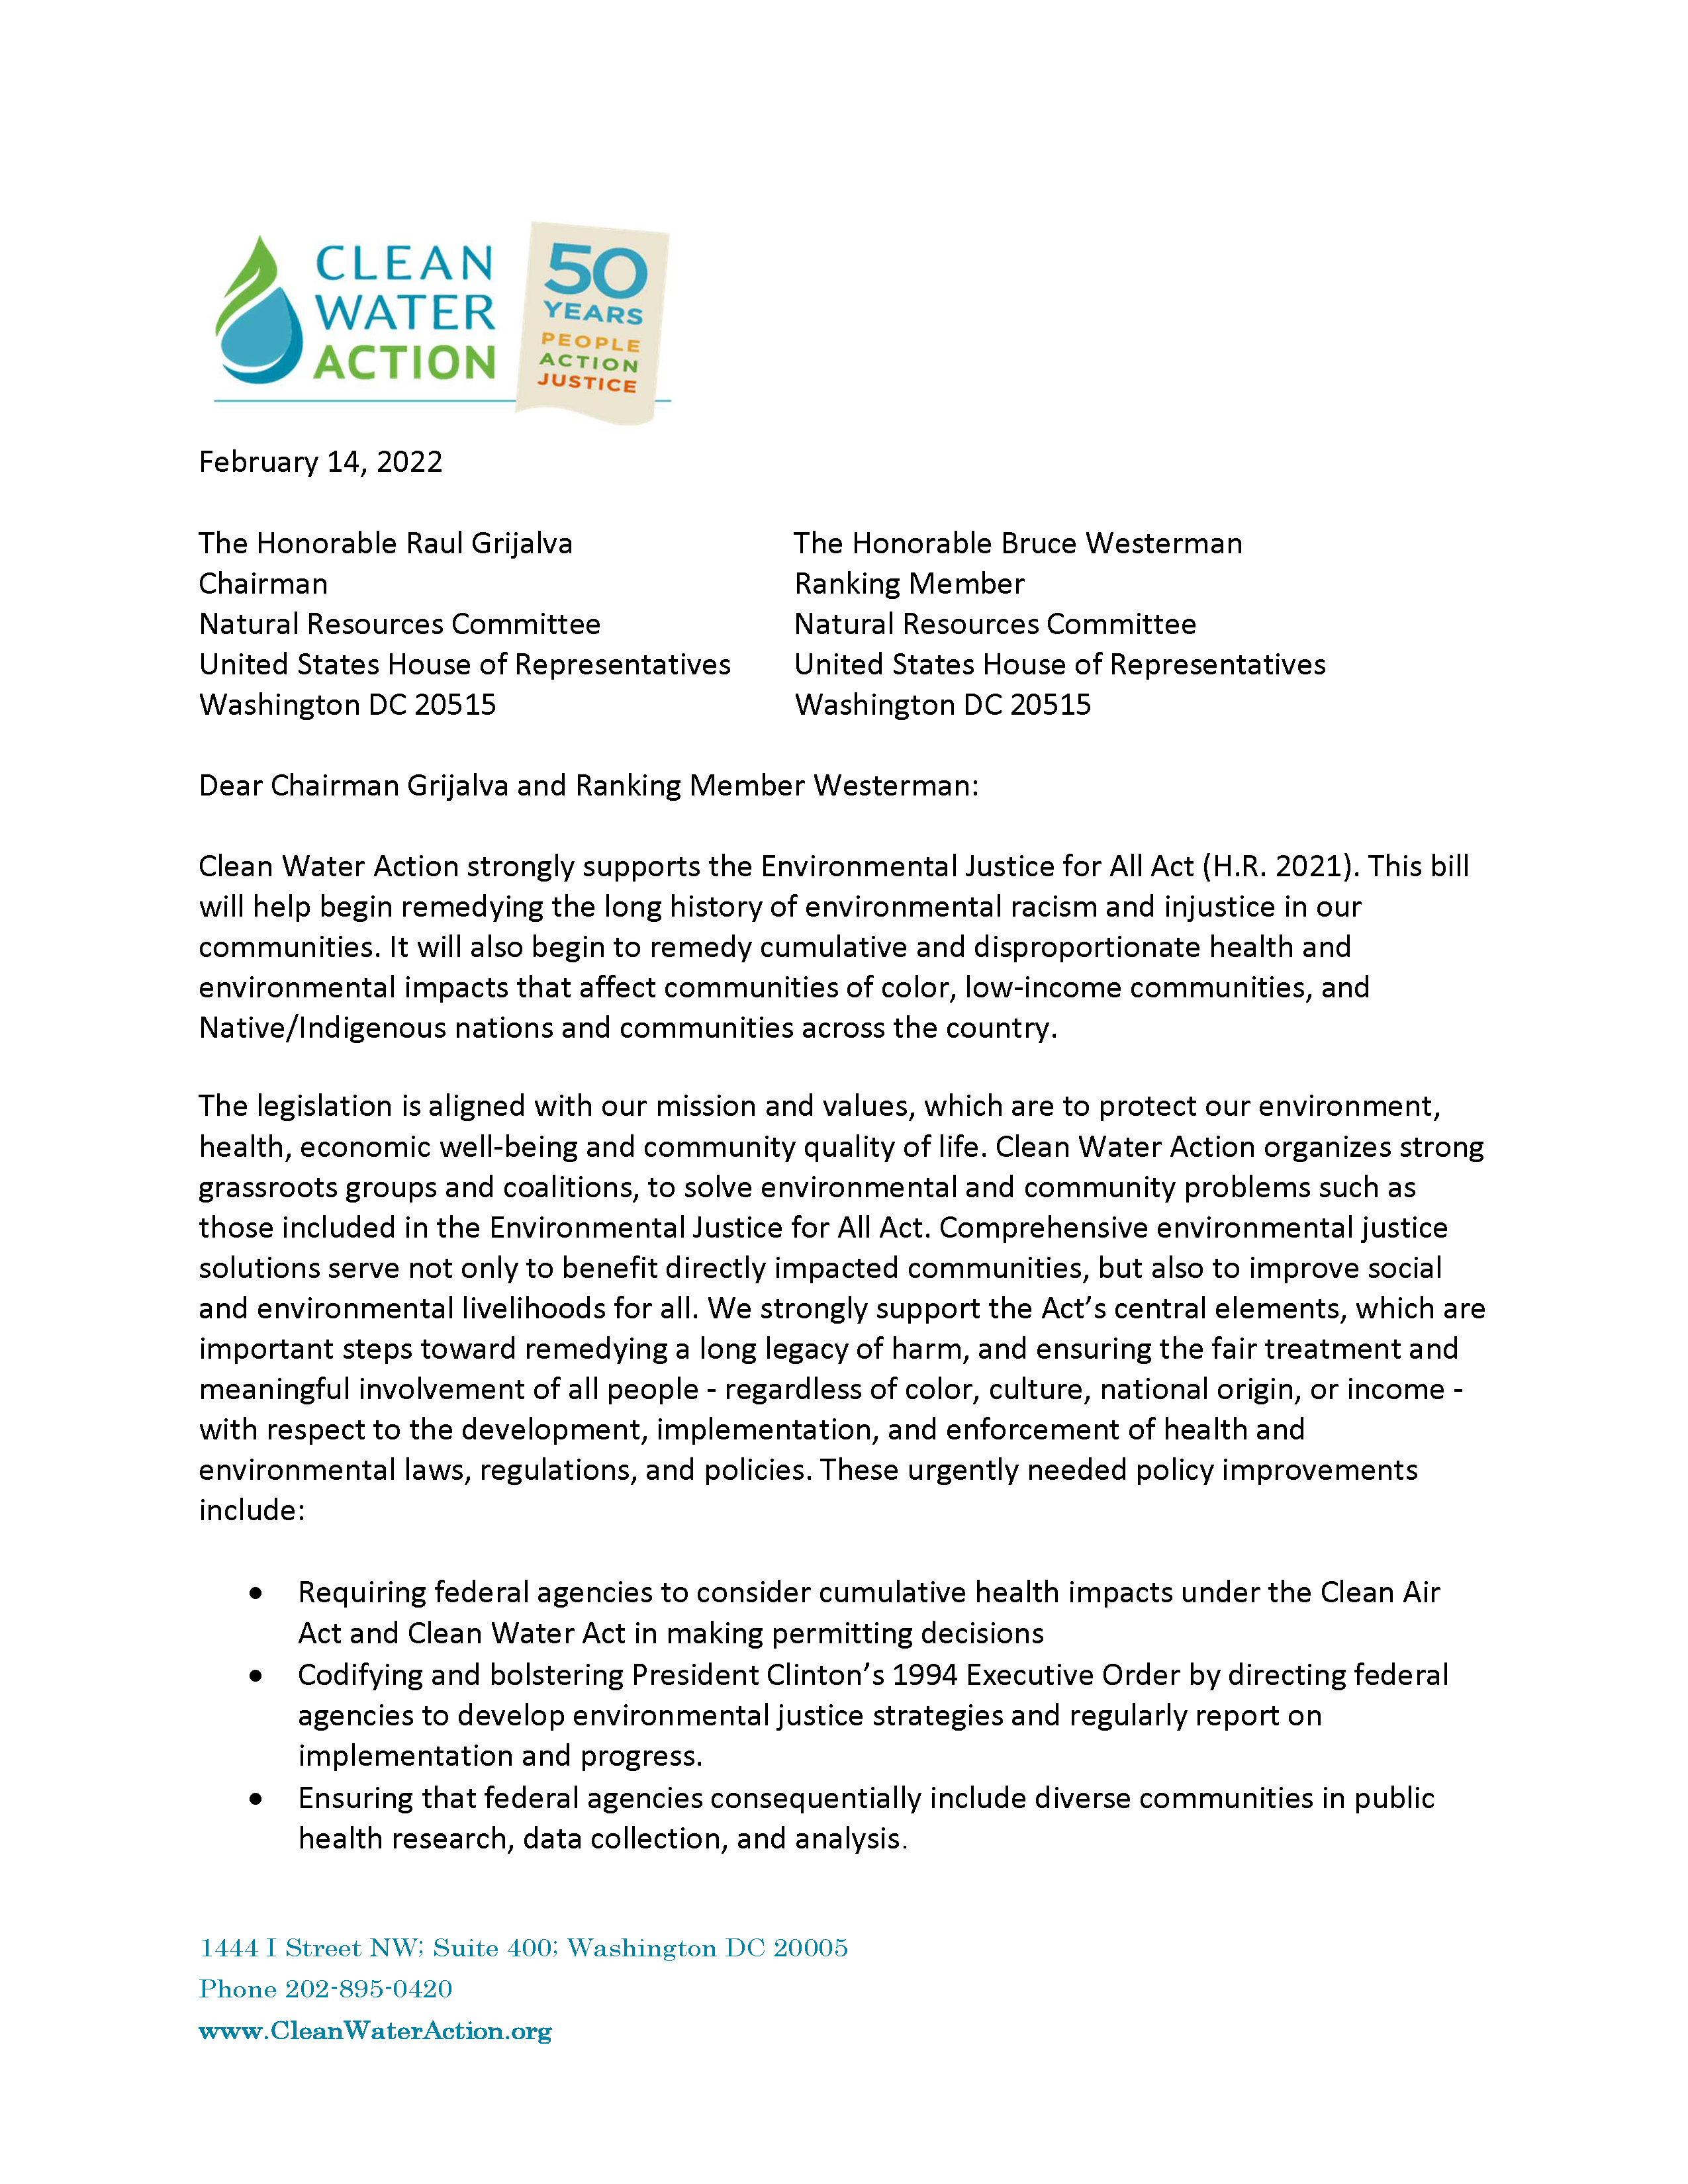 Clean Water Action Environmental Justice for All Act Support Letter